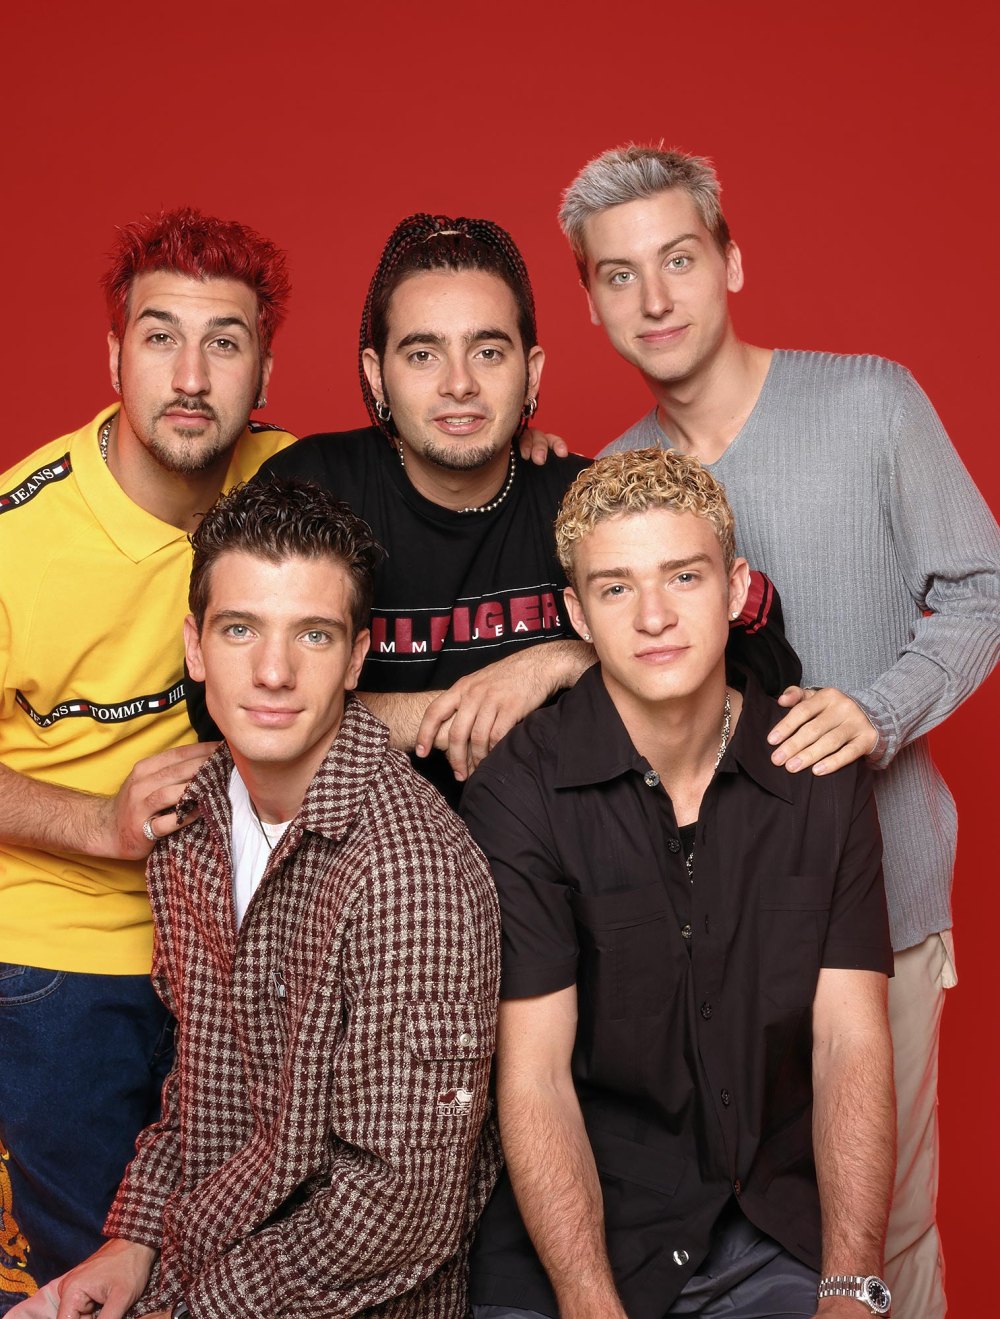 Lance Bass Promises New NSync Song Will Be Better Than the Group's Trolls Reunion Track